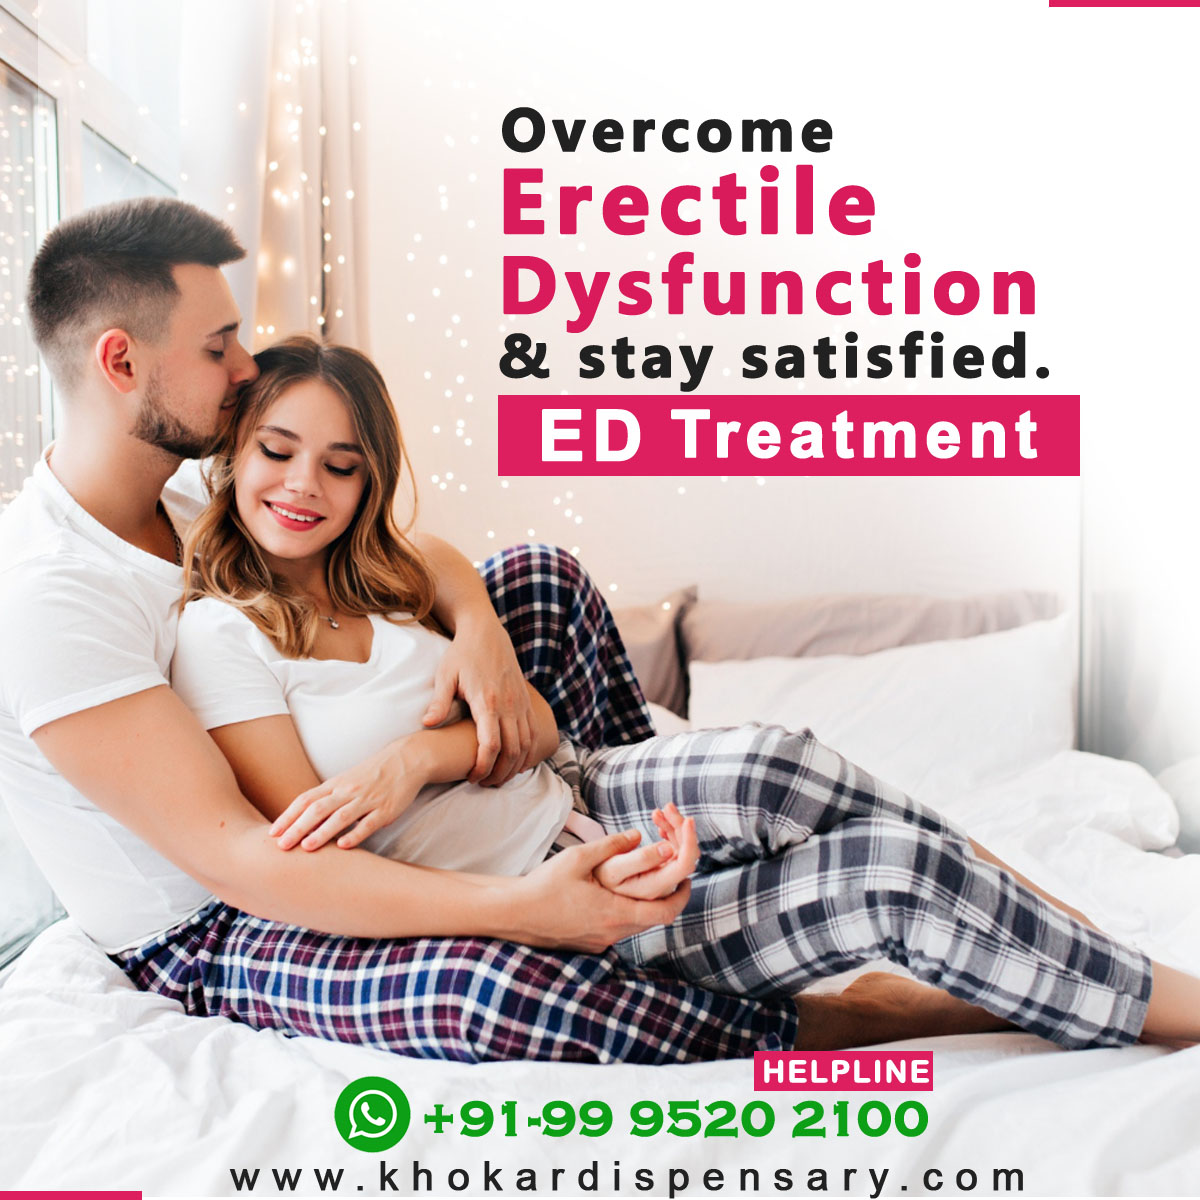 Occurs when a man can't get or keep an erection firm enough for sexual intercourse.

Get ayurveda treatment for ED. Call or WhatsApp +91-9995202100

#ed #sexologist #edtreatment #edclinic #sexclinic #infertility #maleinfertility #ayurveda #edpill #treated #infertilitytreatment